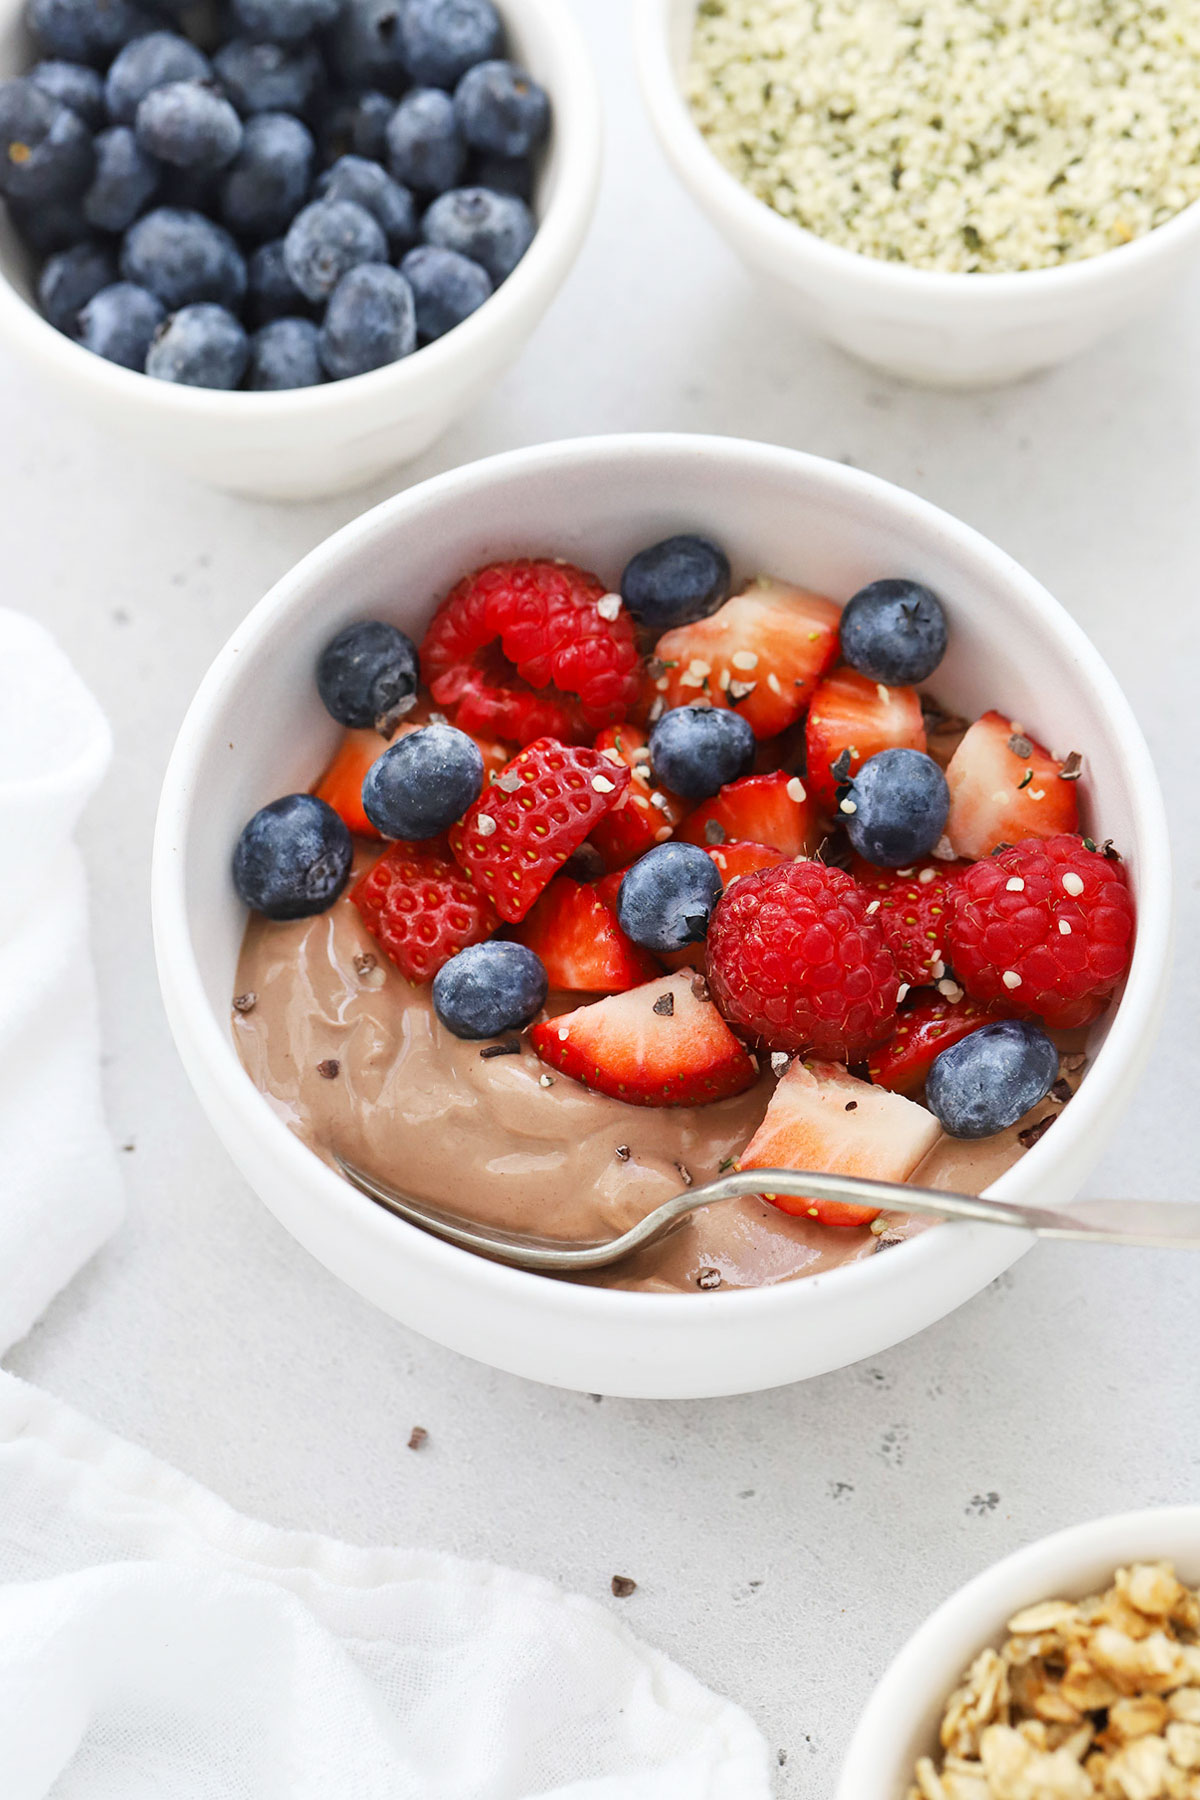 High protein chocolate yogurt bowl topped with fresh berries, hemp seeds, and cacao nibs